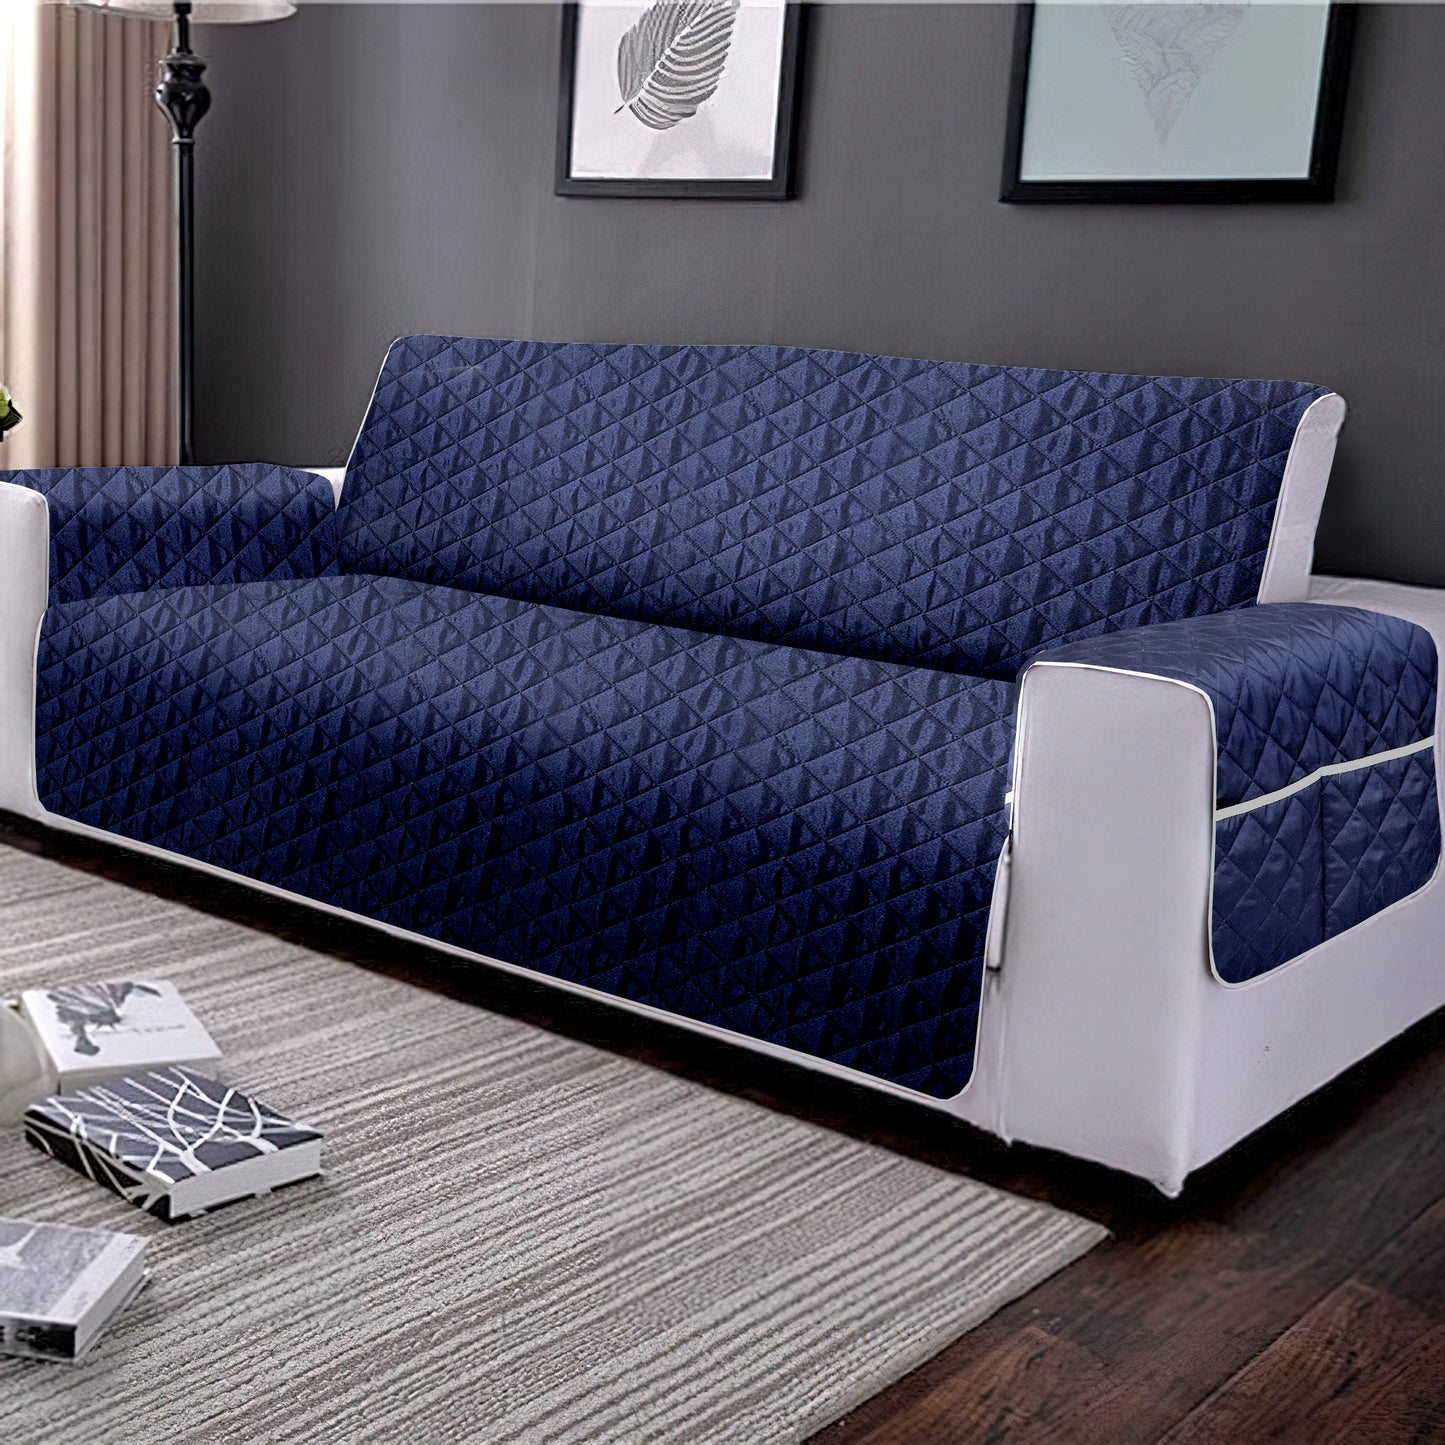 Reversible Quilted Polyester Solid Sofa Cover 2 Seater- Navy Blue & Brown